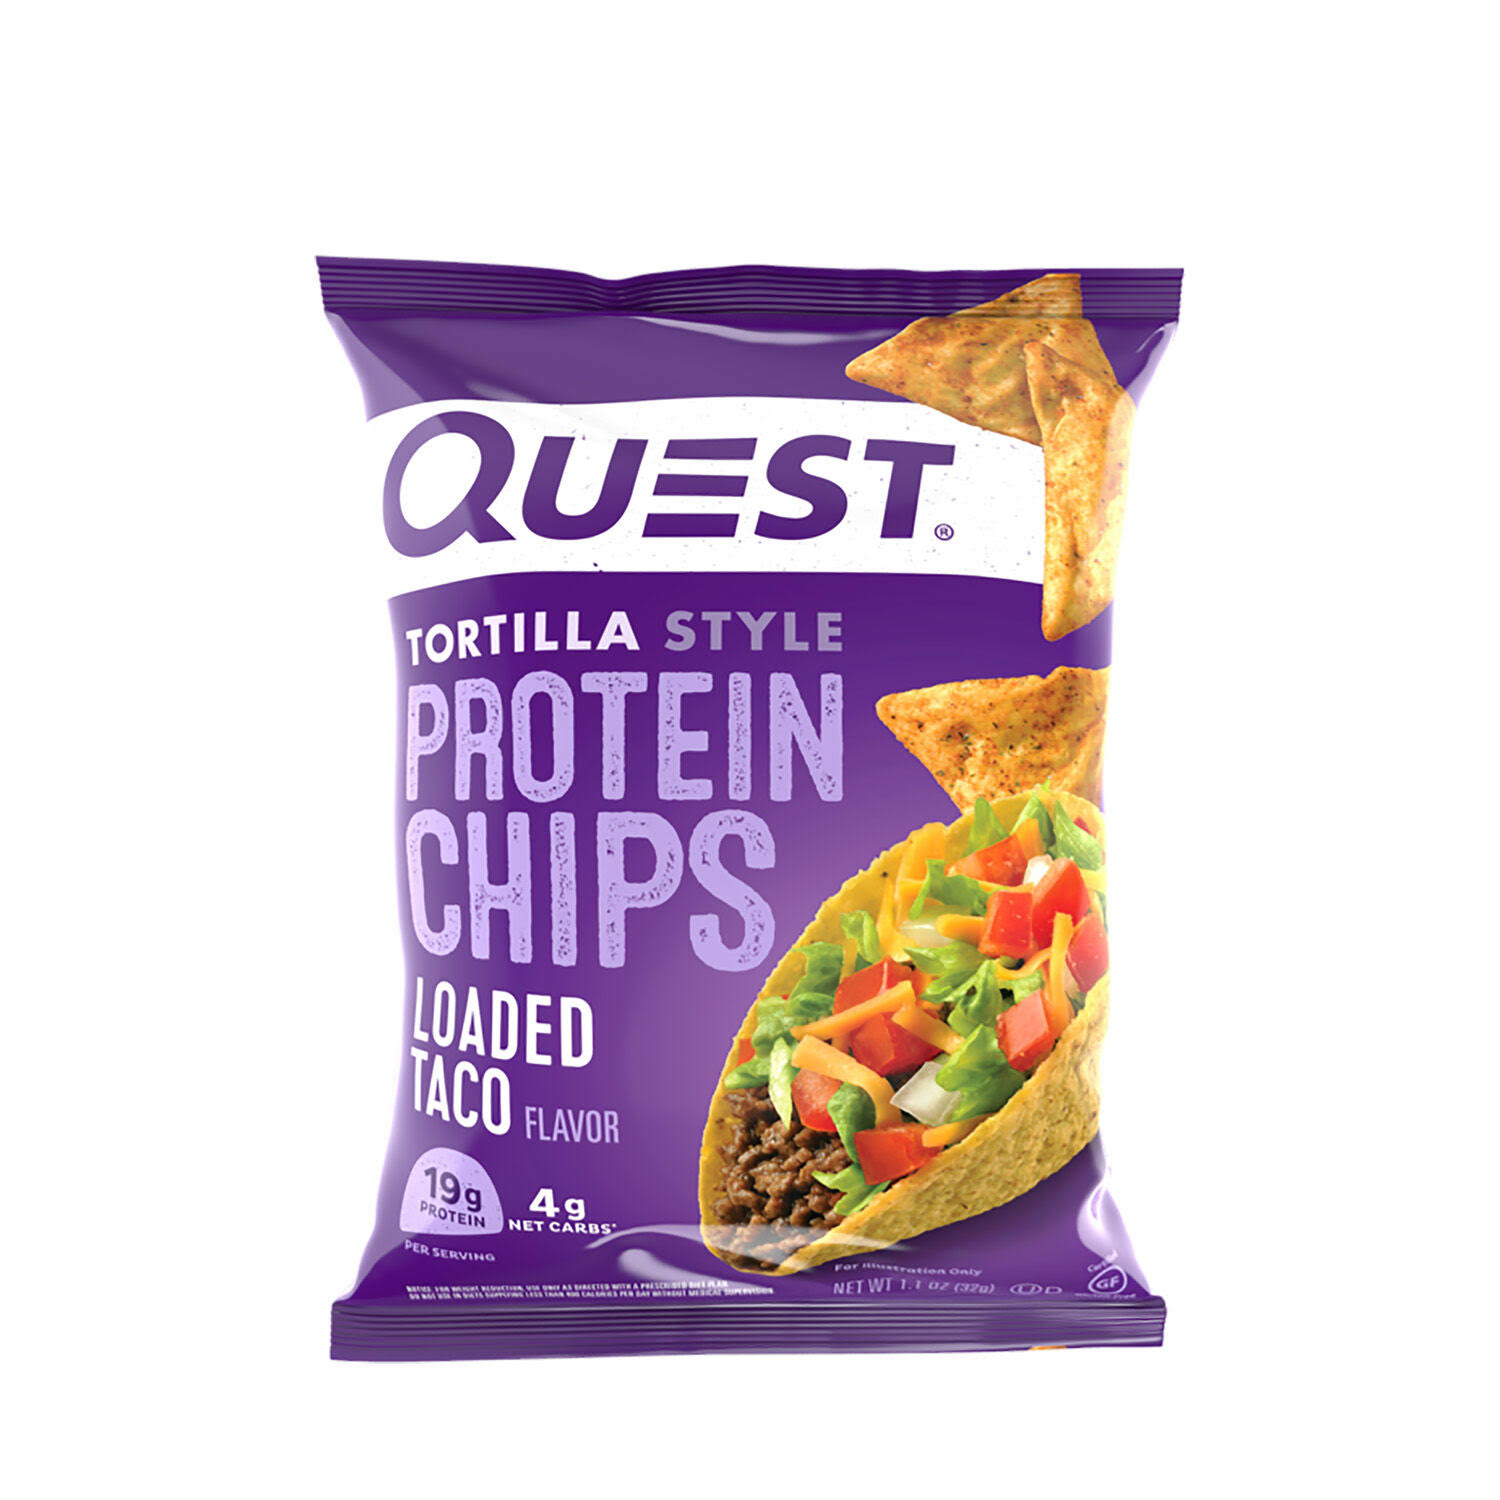 Quest Tortilla Protein Chips - Loaded Taco